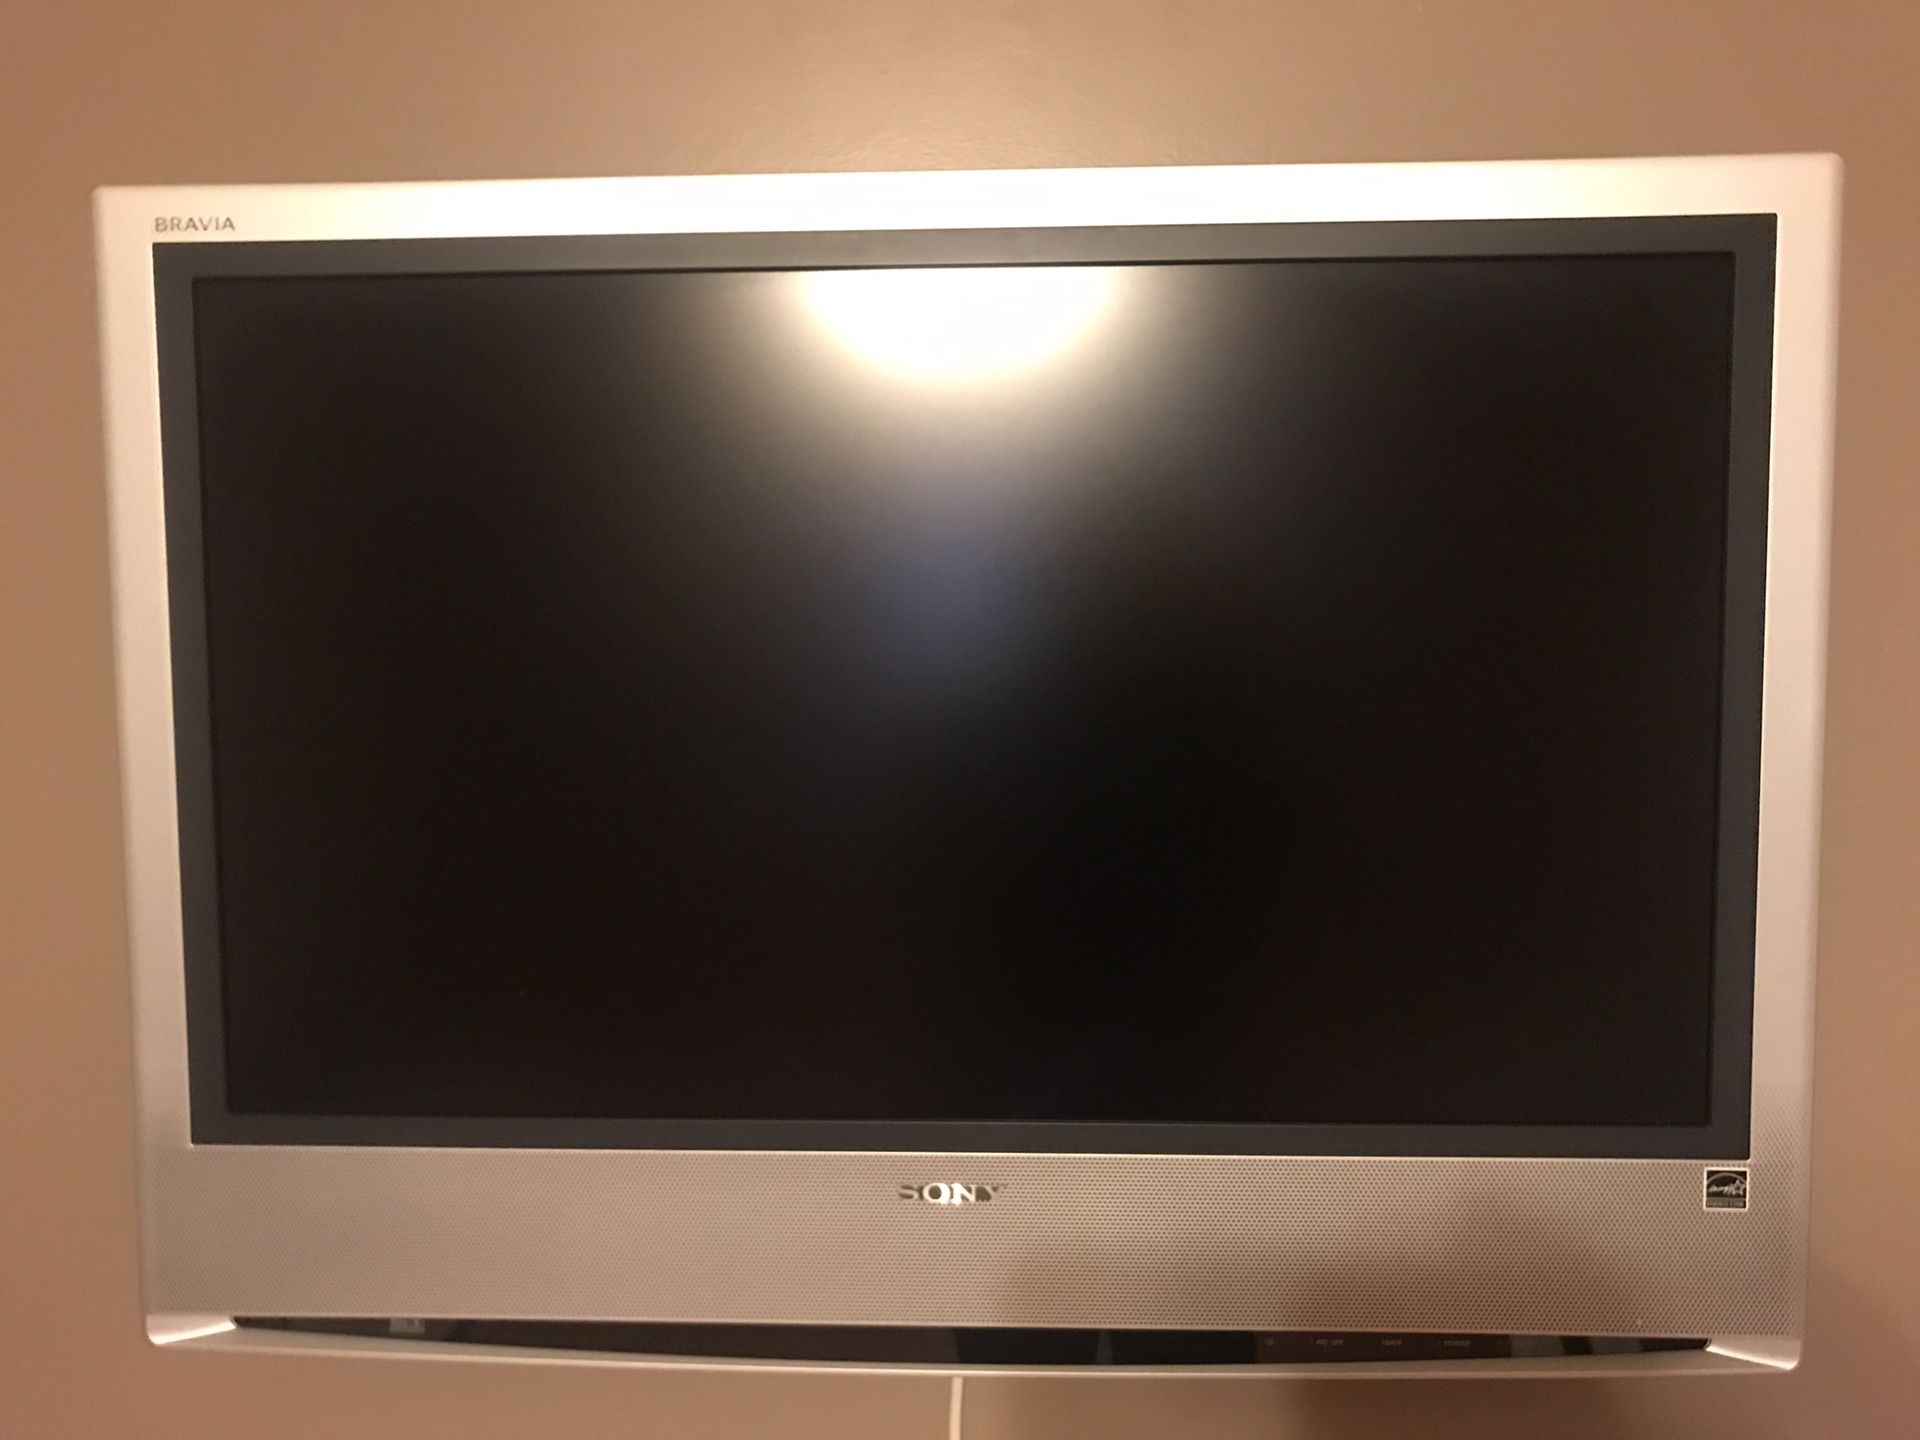 32’ inch Sony TV with wall mount